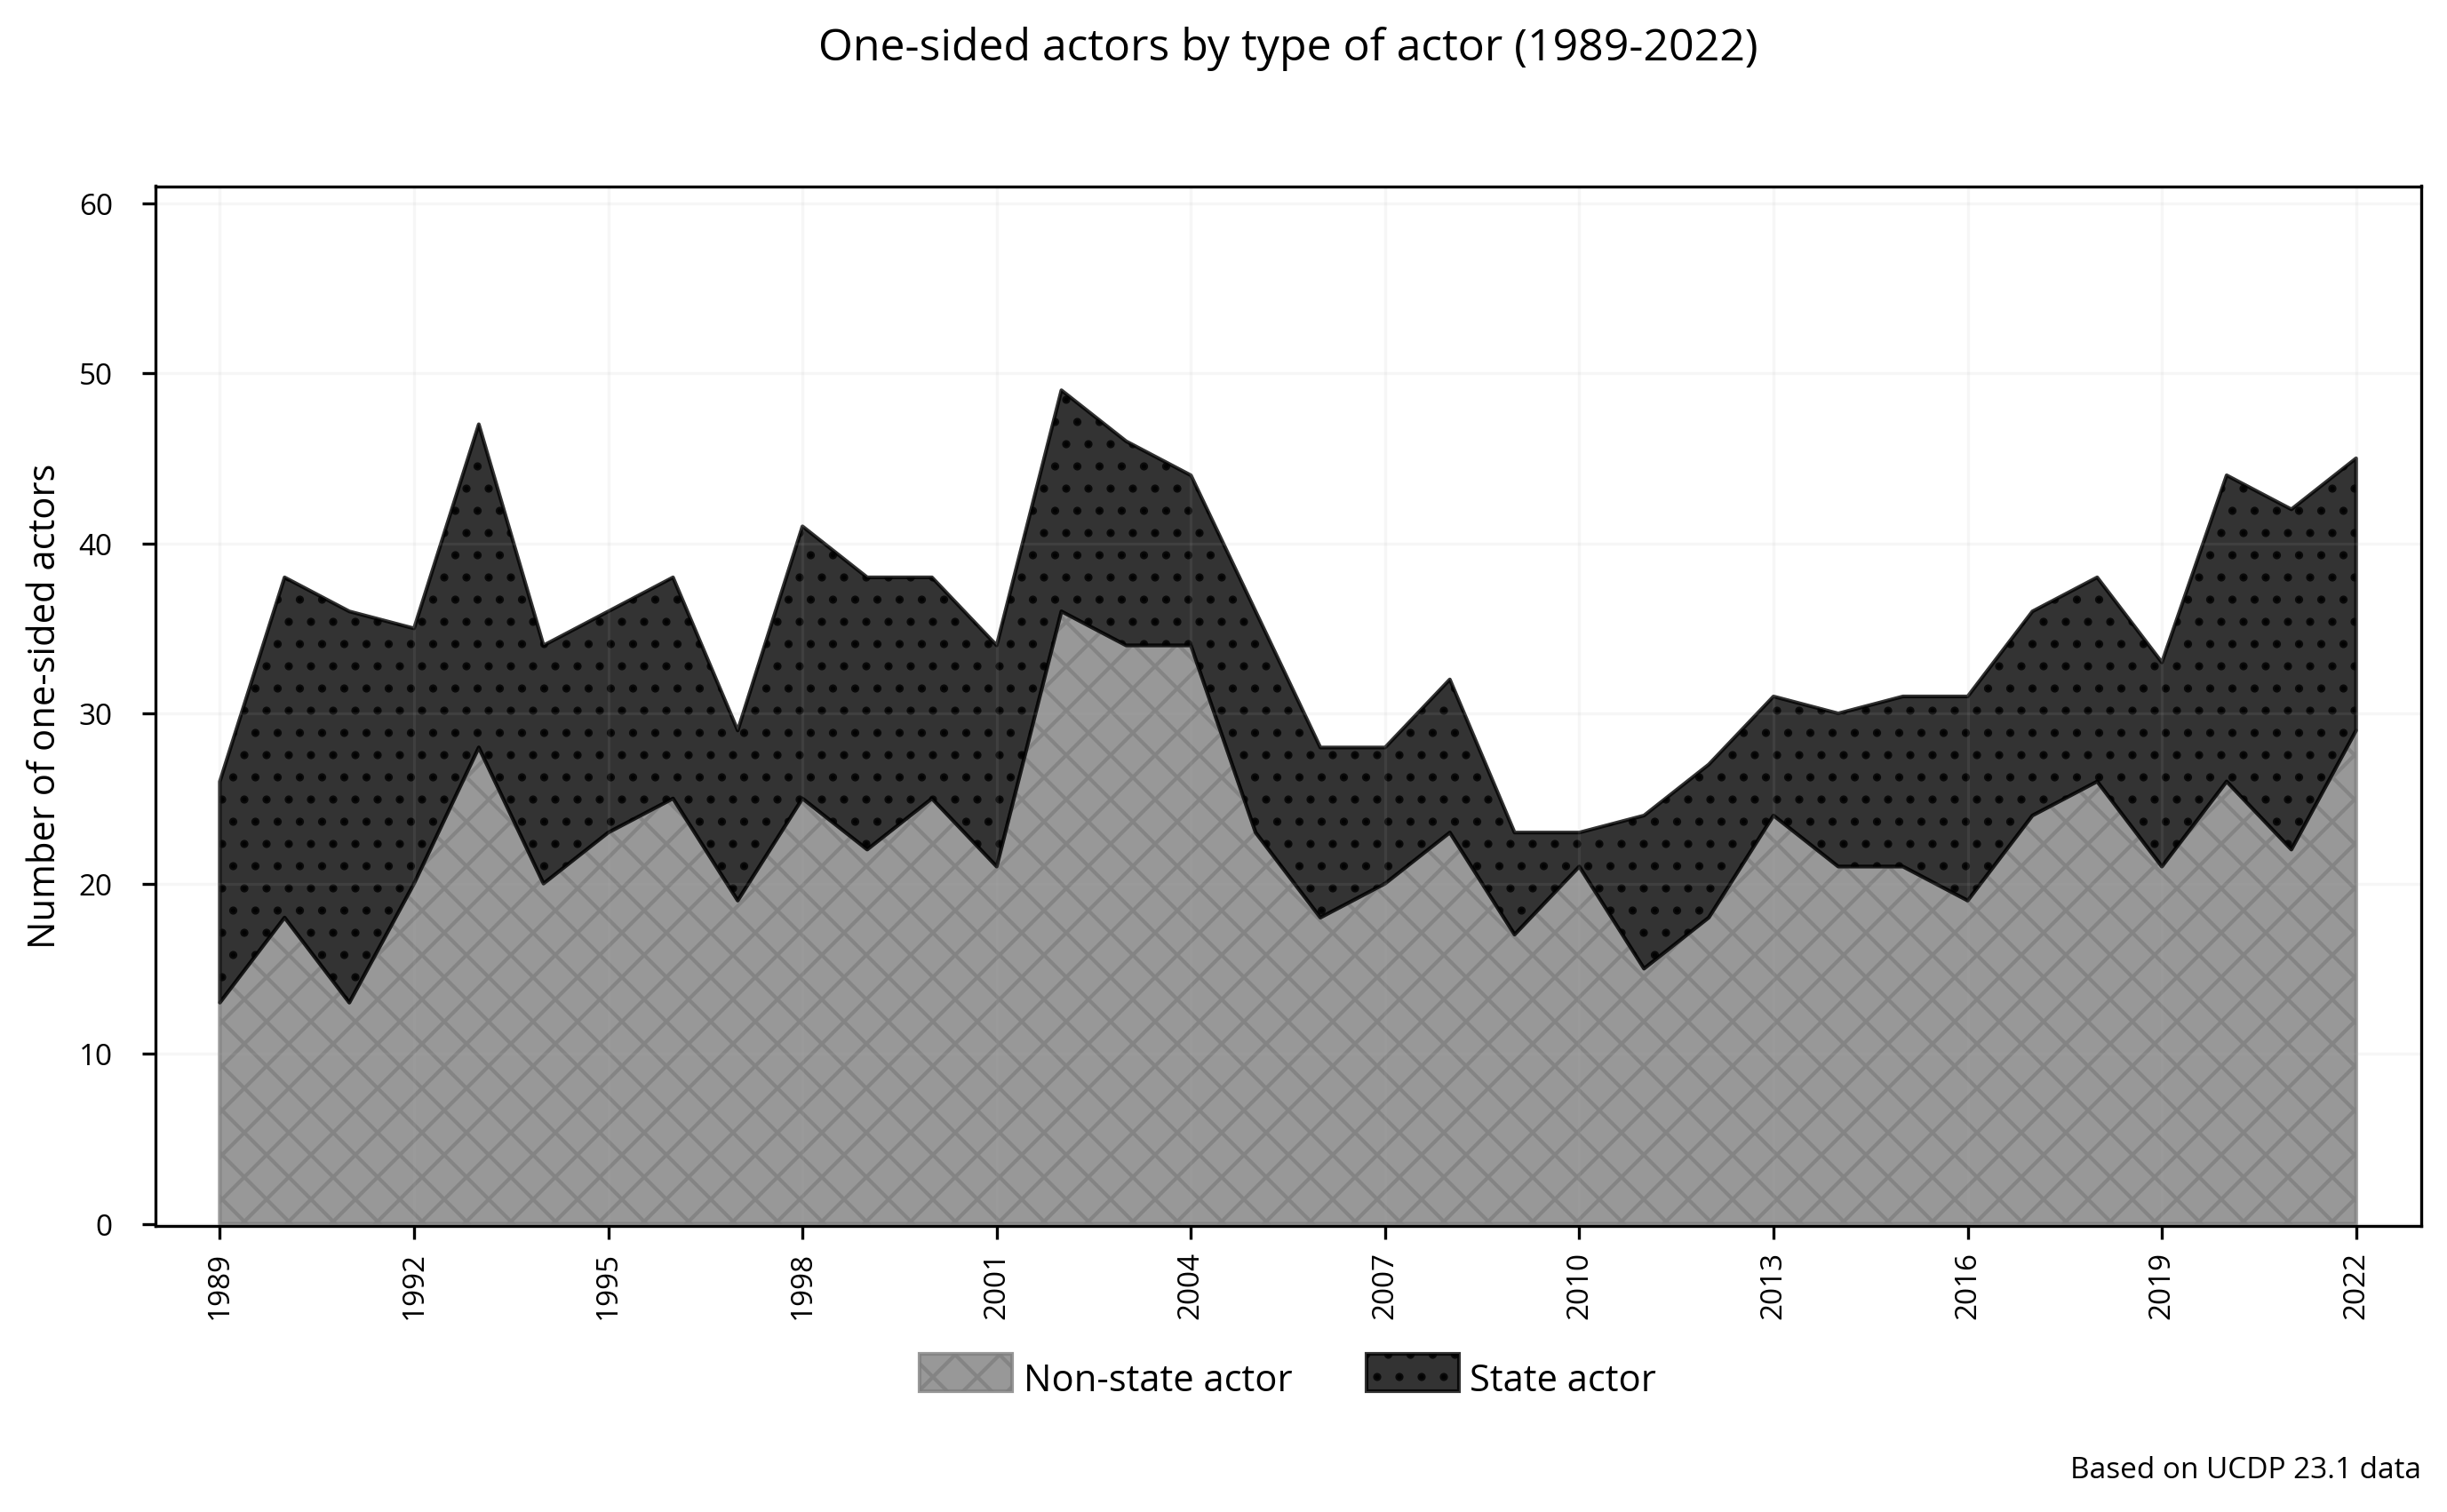 One-sided: Actors by type of actor